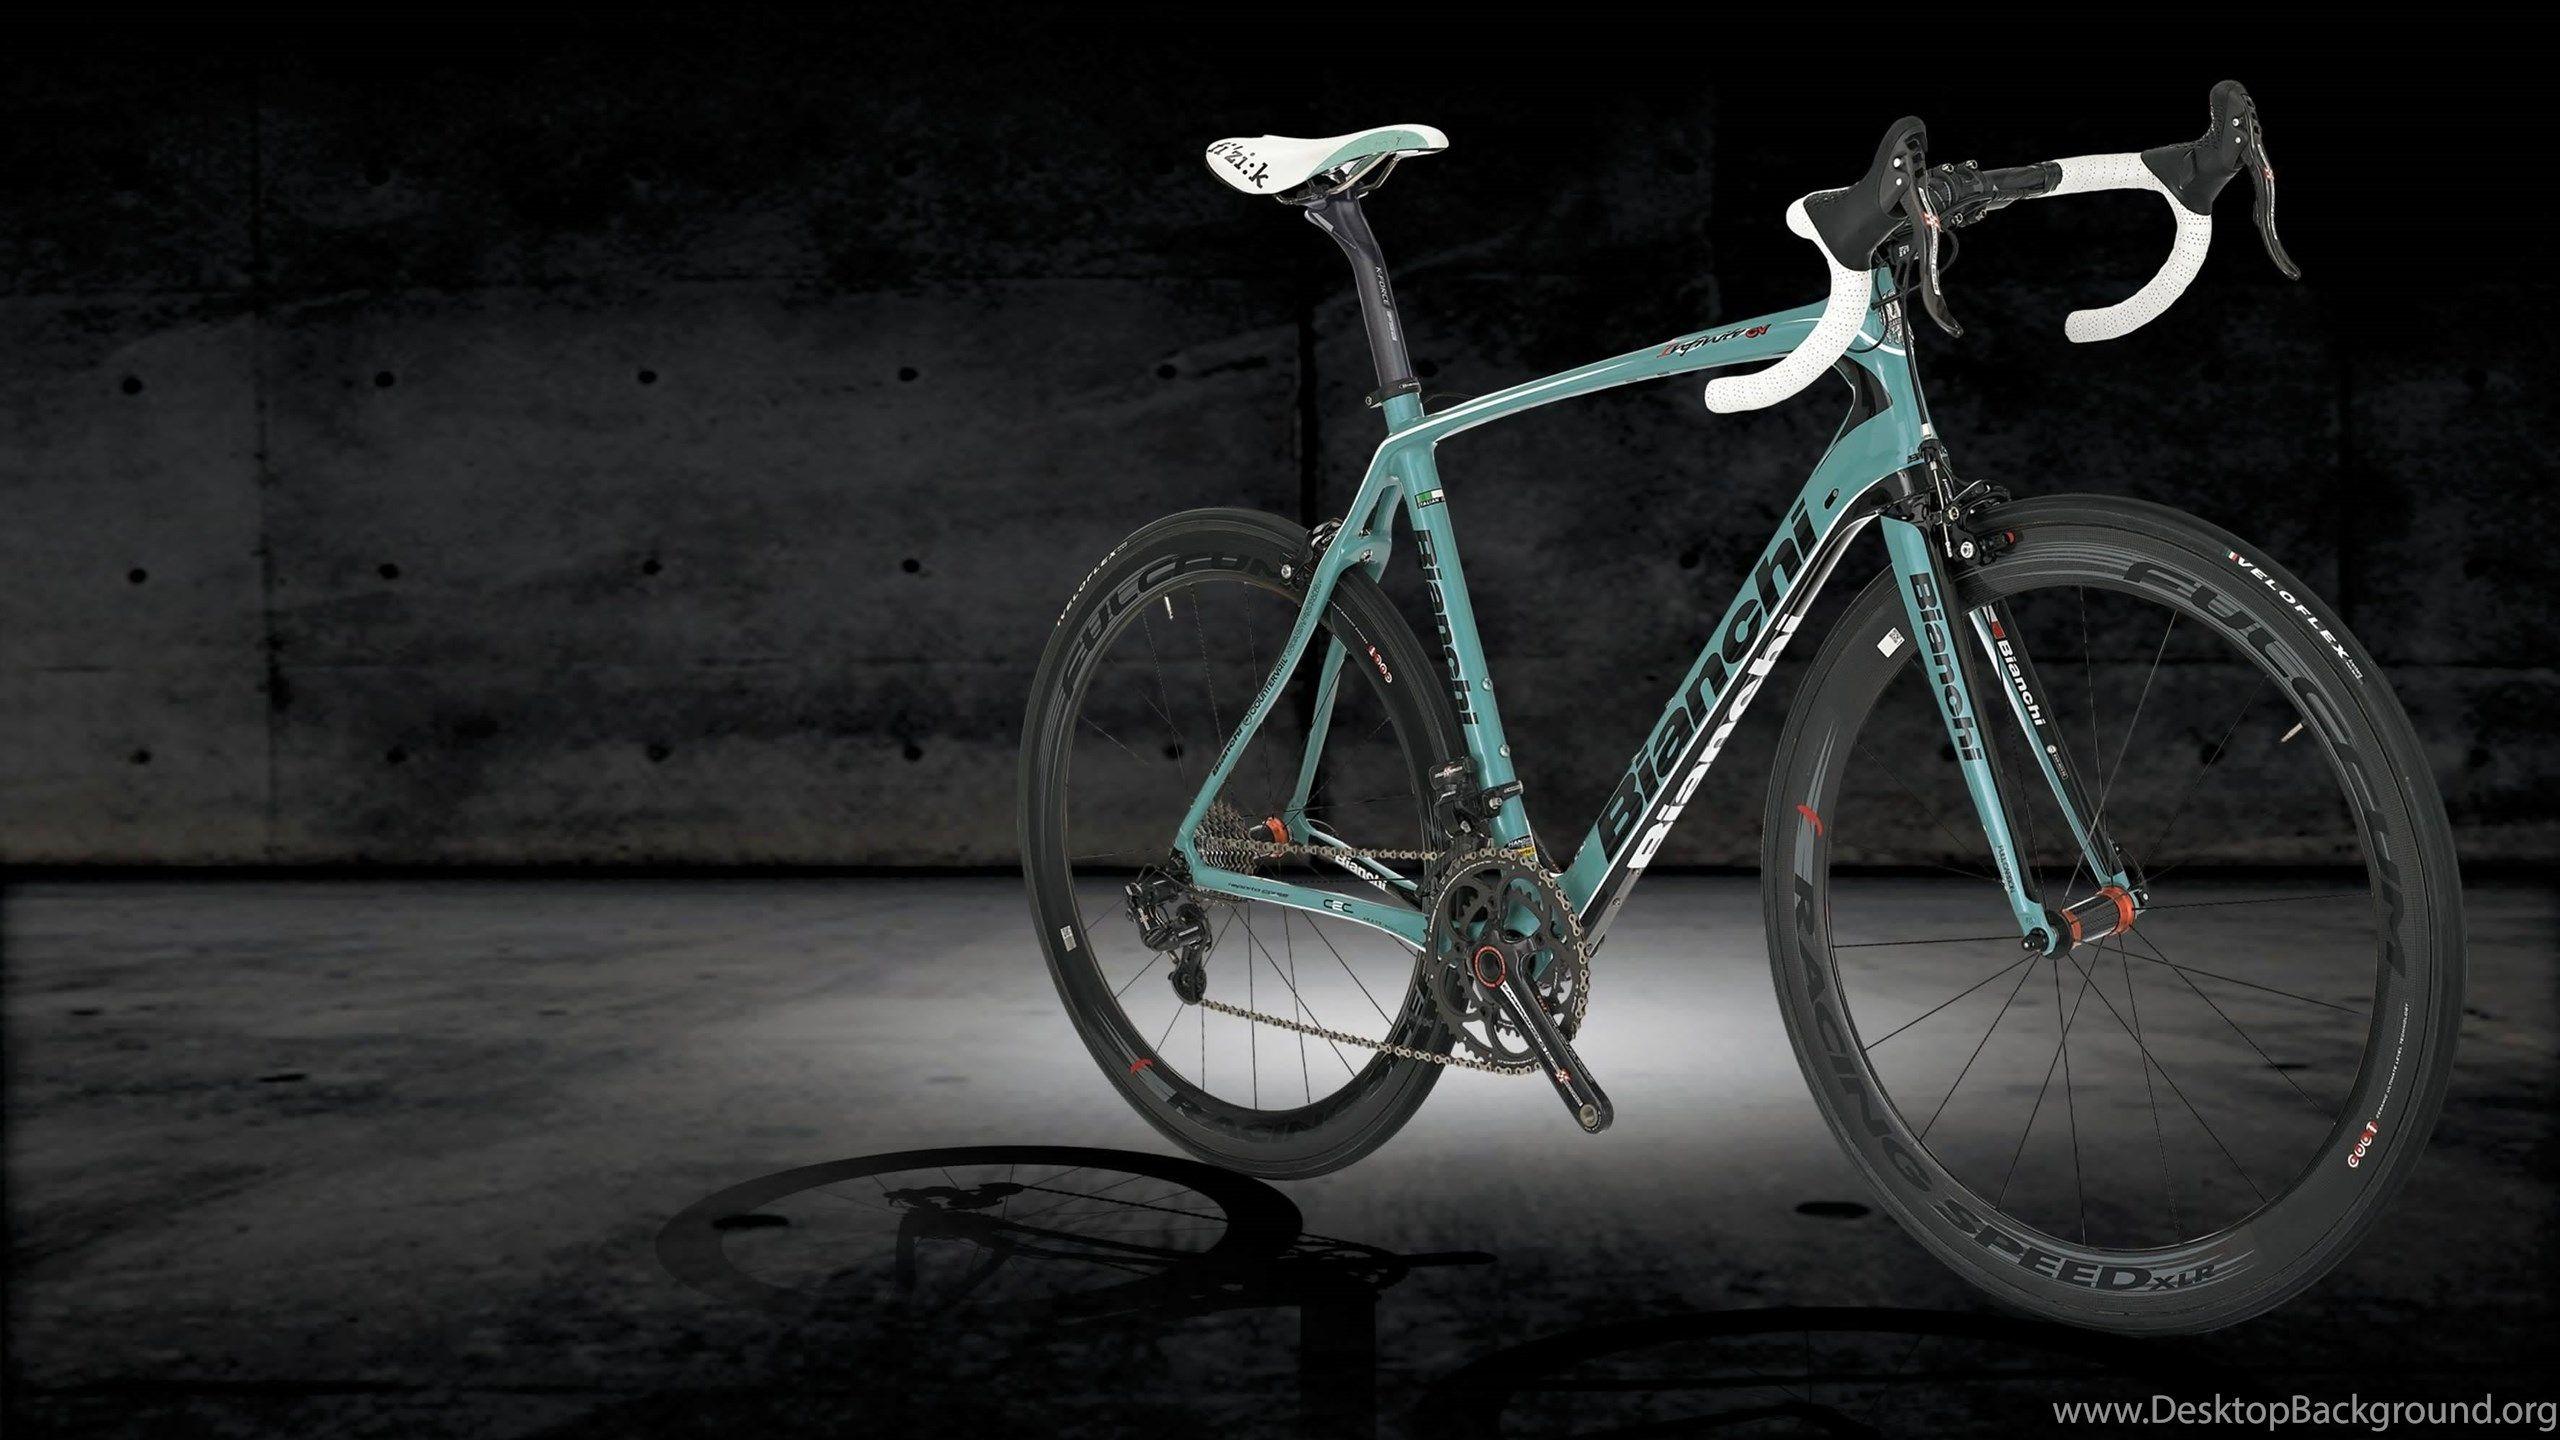 Top Bianchi Bicycle Wallpaper Widescreen Image For